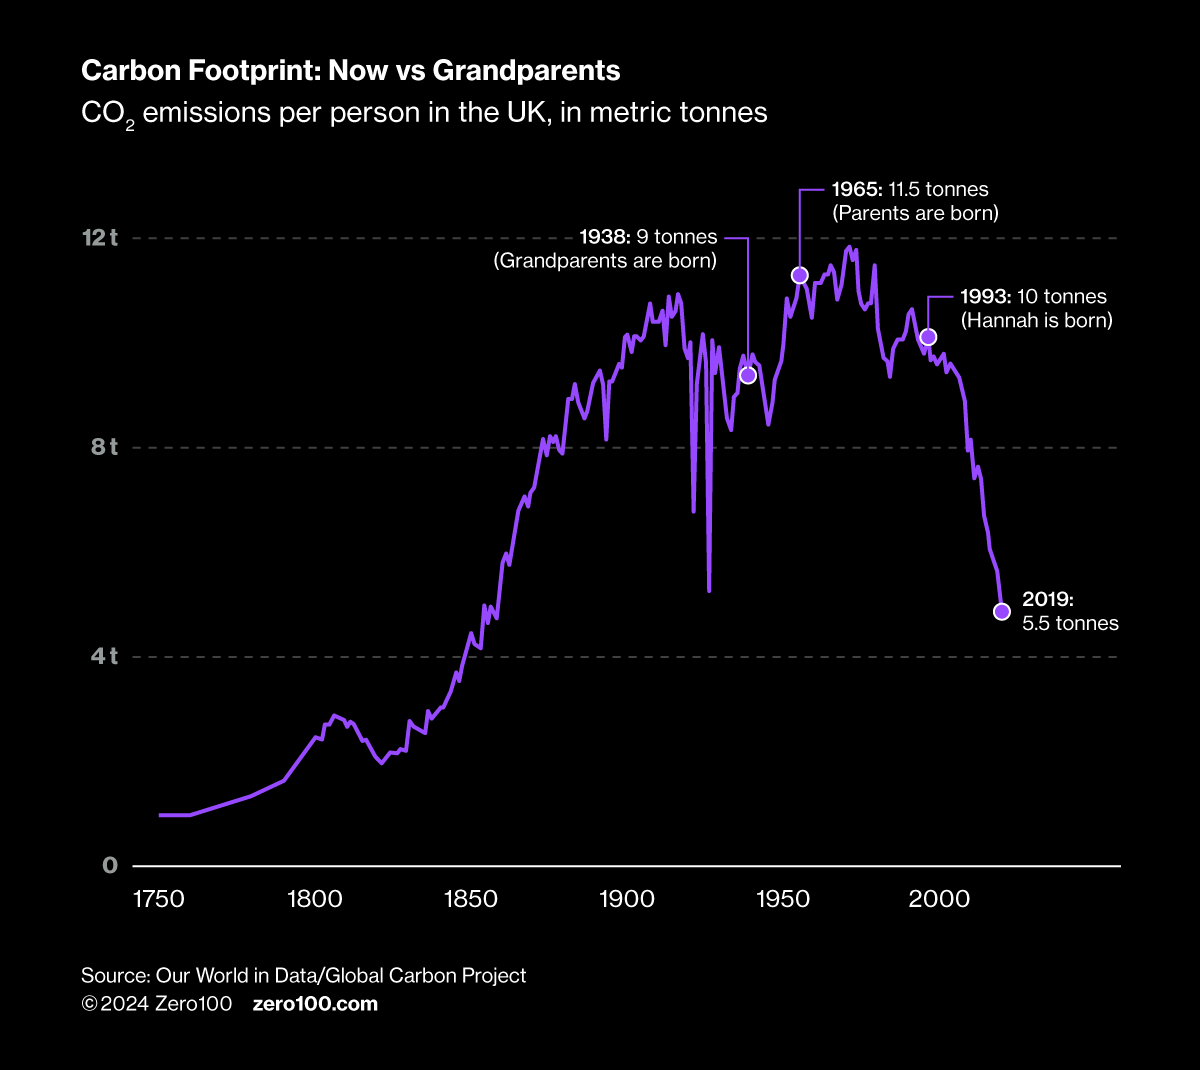 Line graph showing CO2 emissions per person in the UK, 150-present.
Source: Our World in Data/Global Carbon project